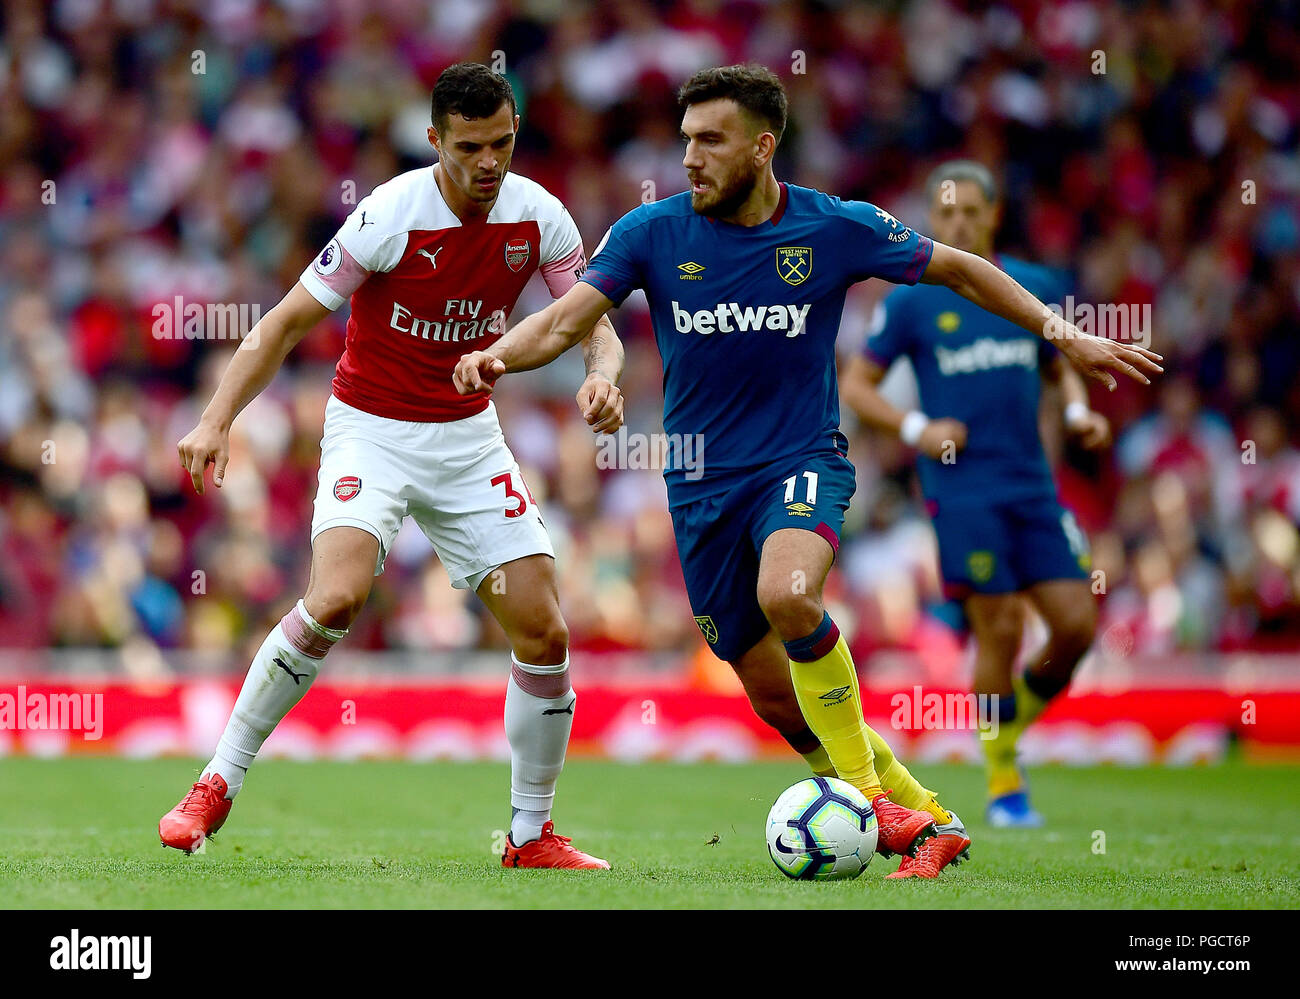 Arsenal's Granit Xhaka (left) and West Ham United's Robert Snodgrass (right) battle for the ball during the Premier League match at the Emirates Stadium, London. Stock Photo